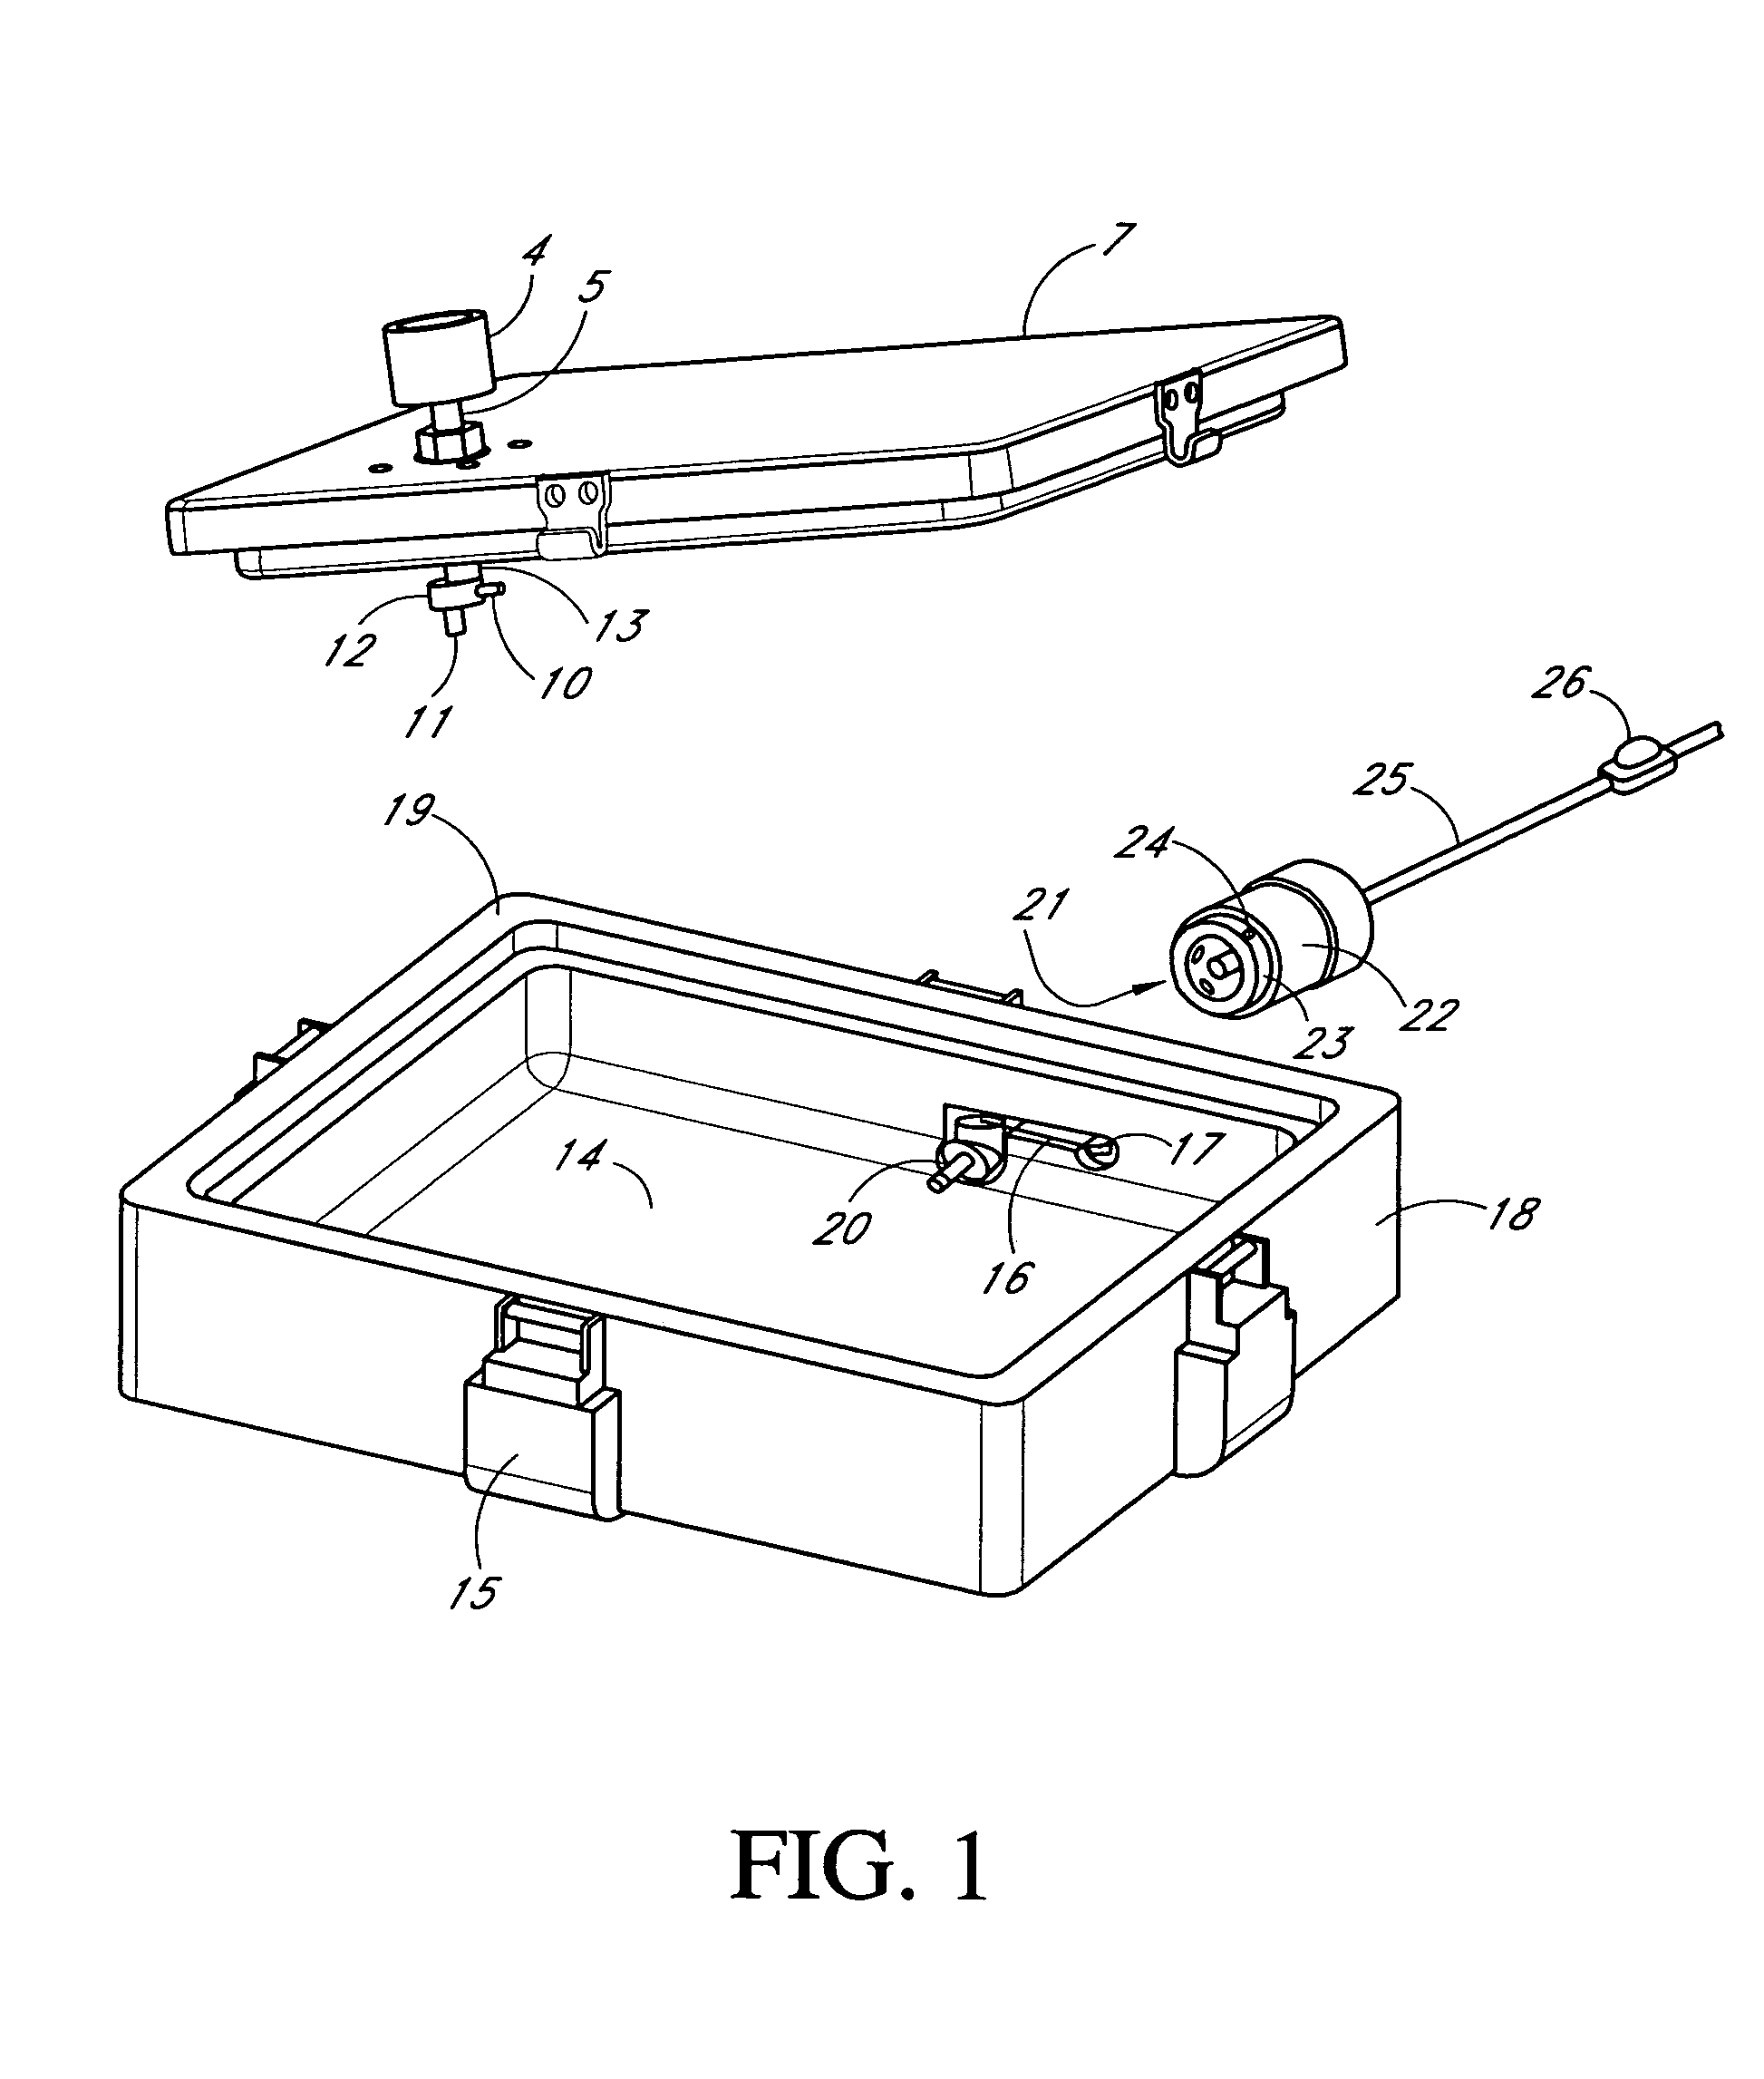 System for providing wireless waterproof audio